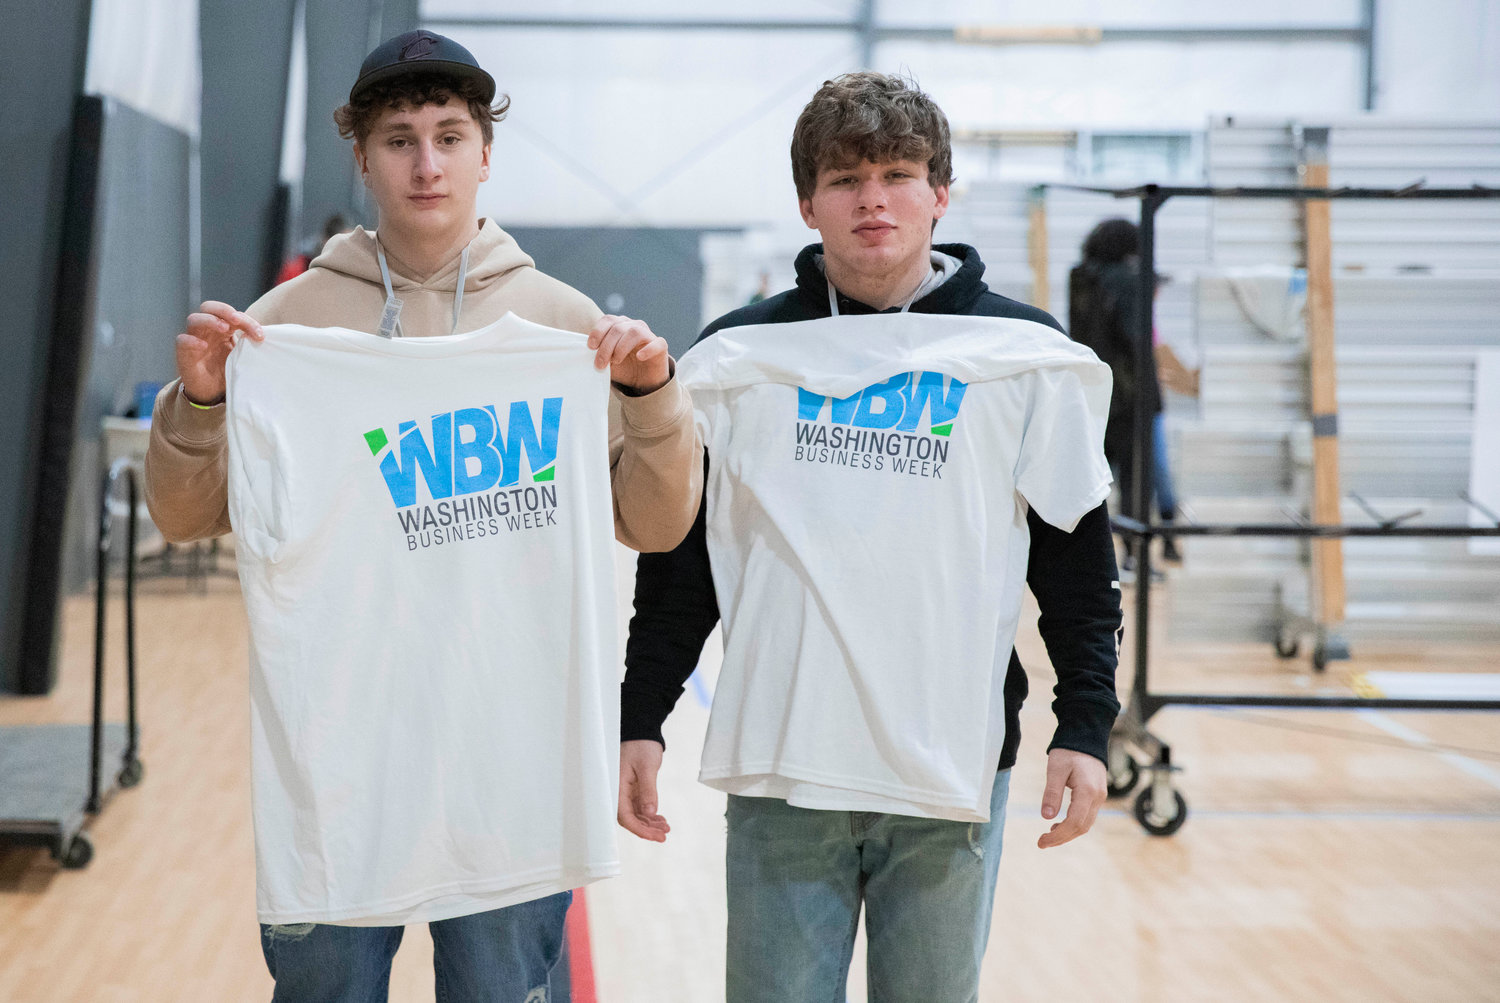 Centralia High School students Tim Eberly and Dylan Mock hold up their Washington Business Week shirts Wednesday morning at the Northwest Sports Hub.